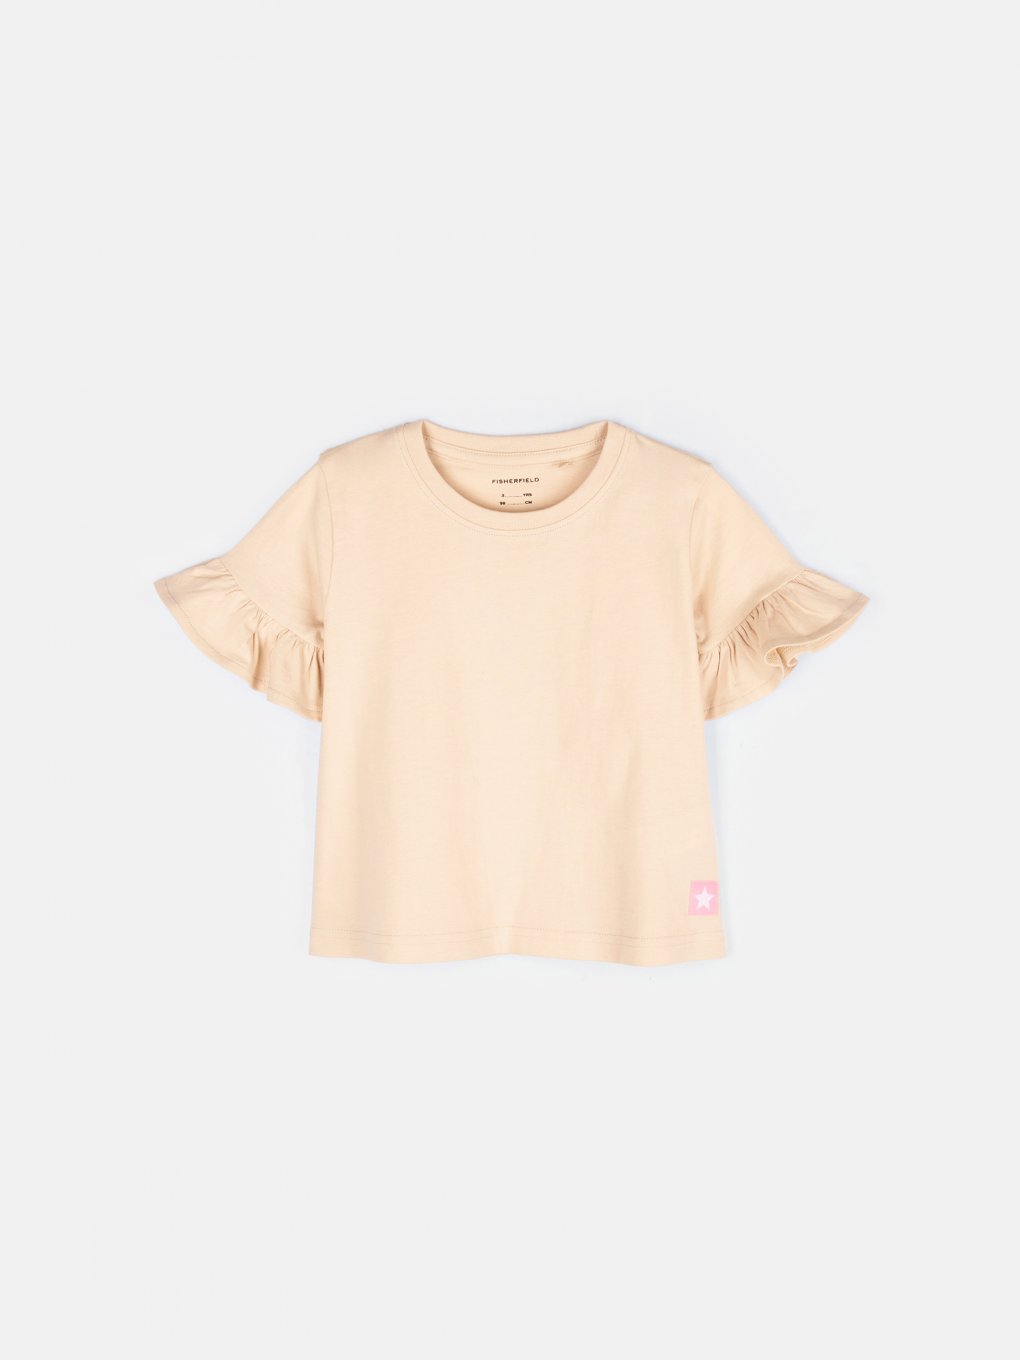 Cotton t-shirt with sleeve ruffle